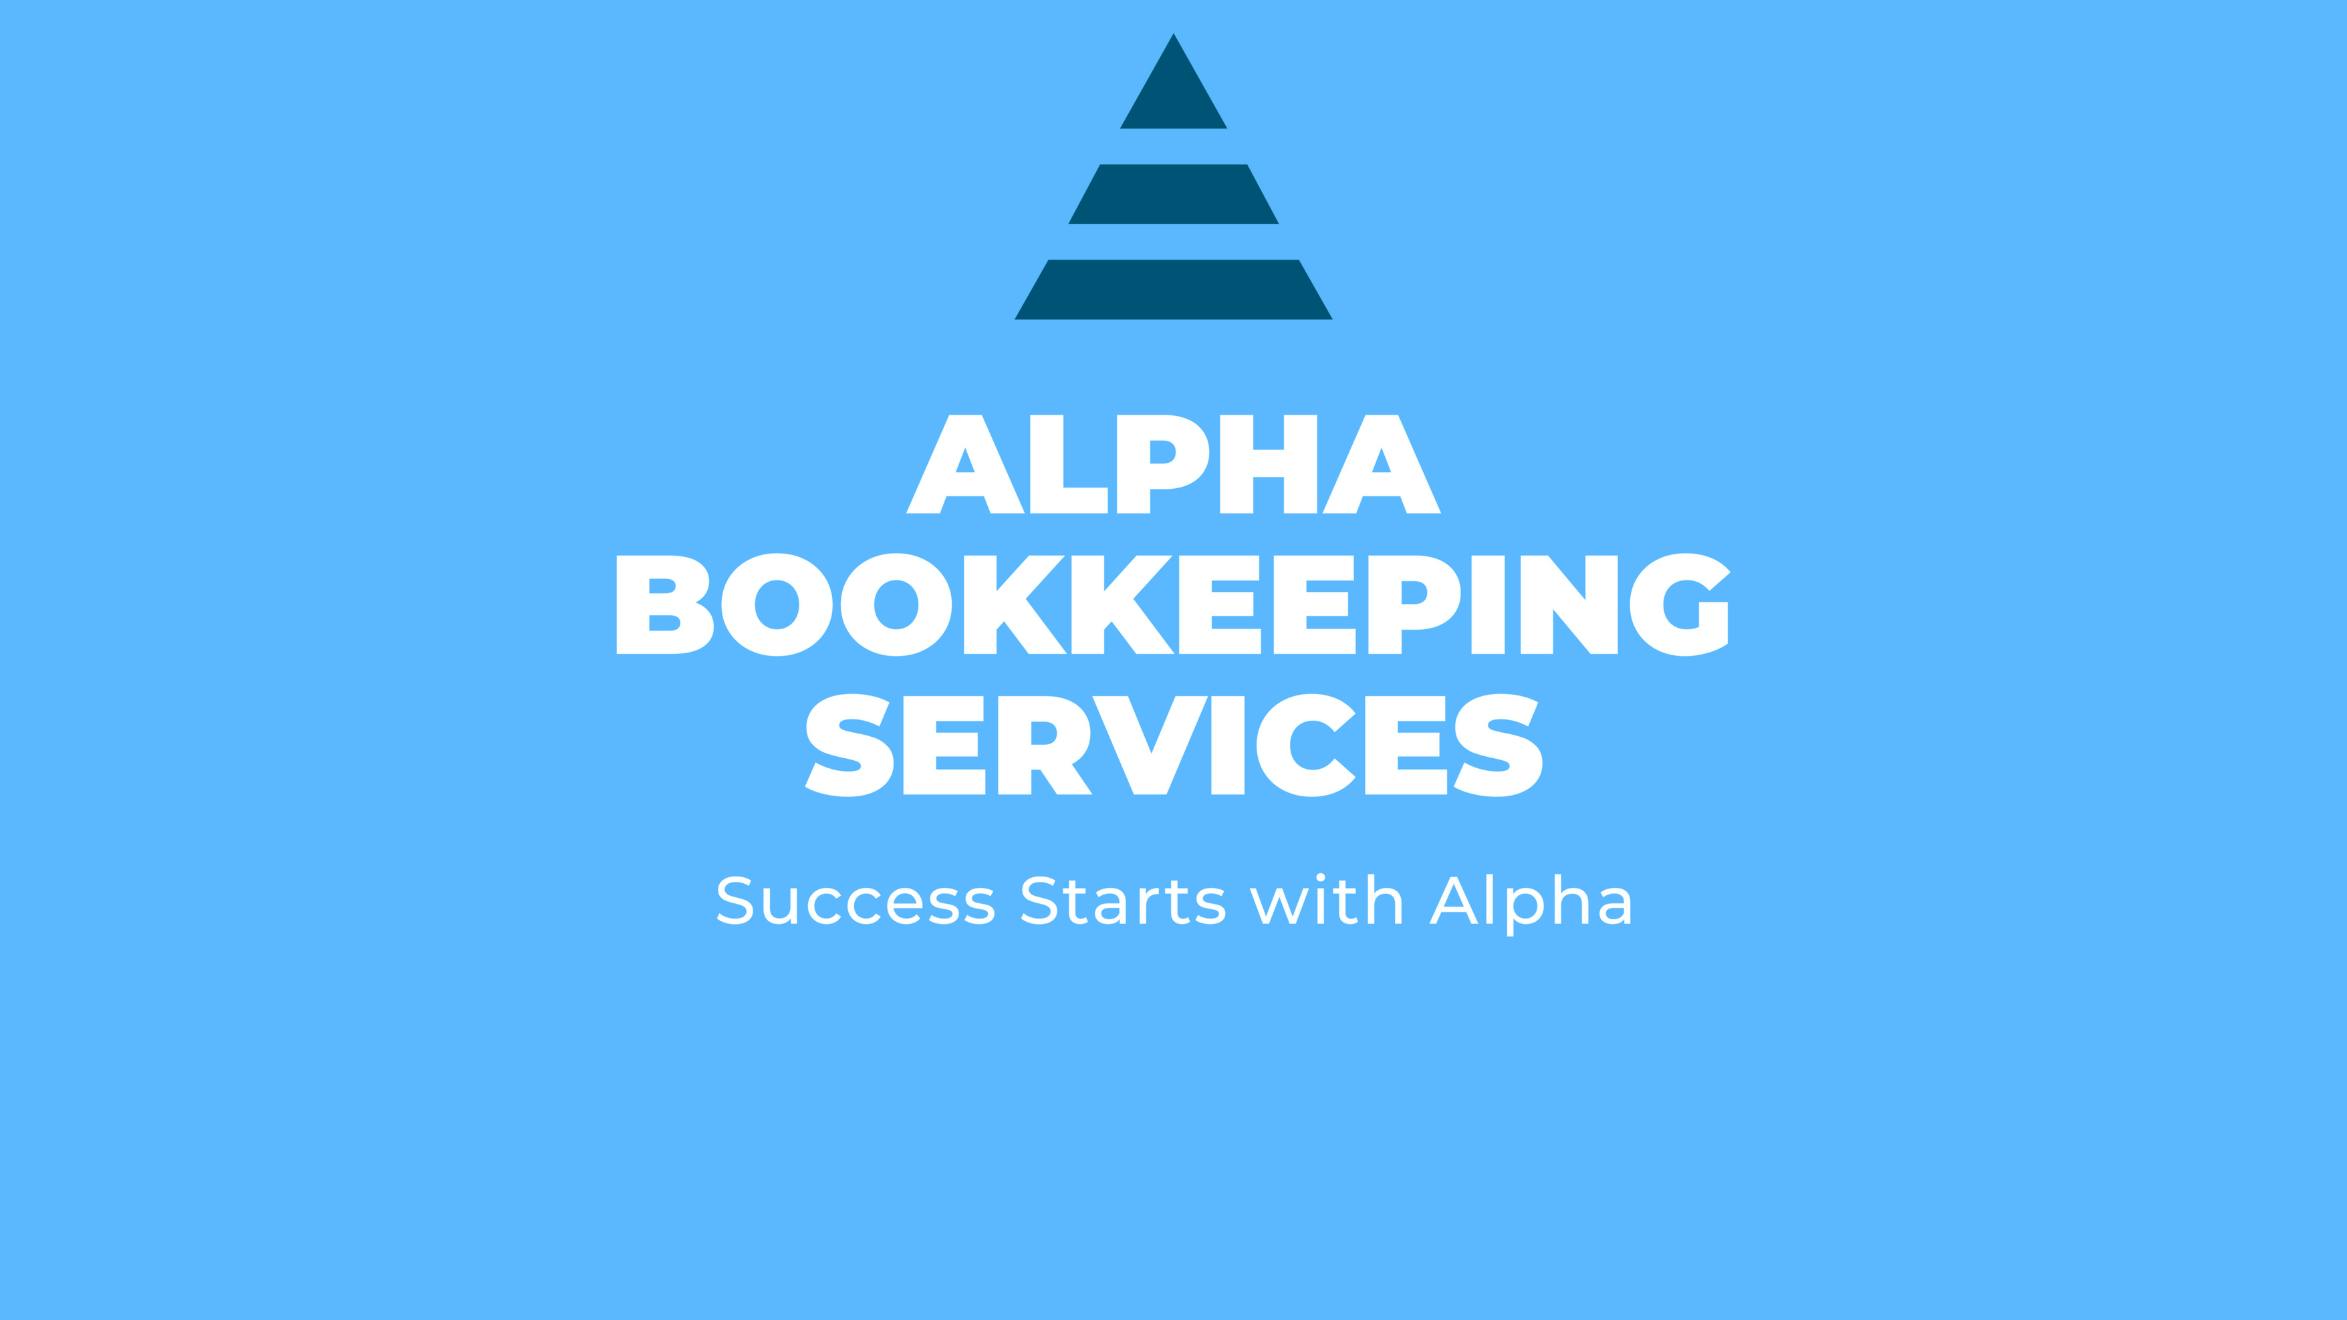 Alpha Bookkeeping Services